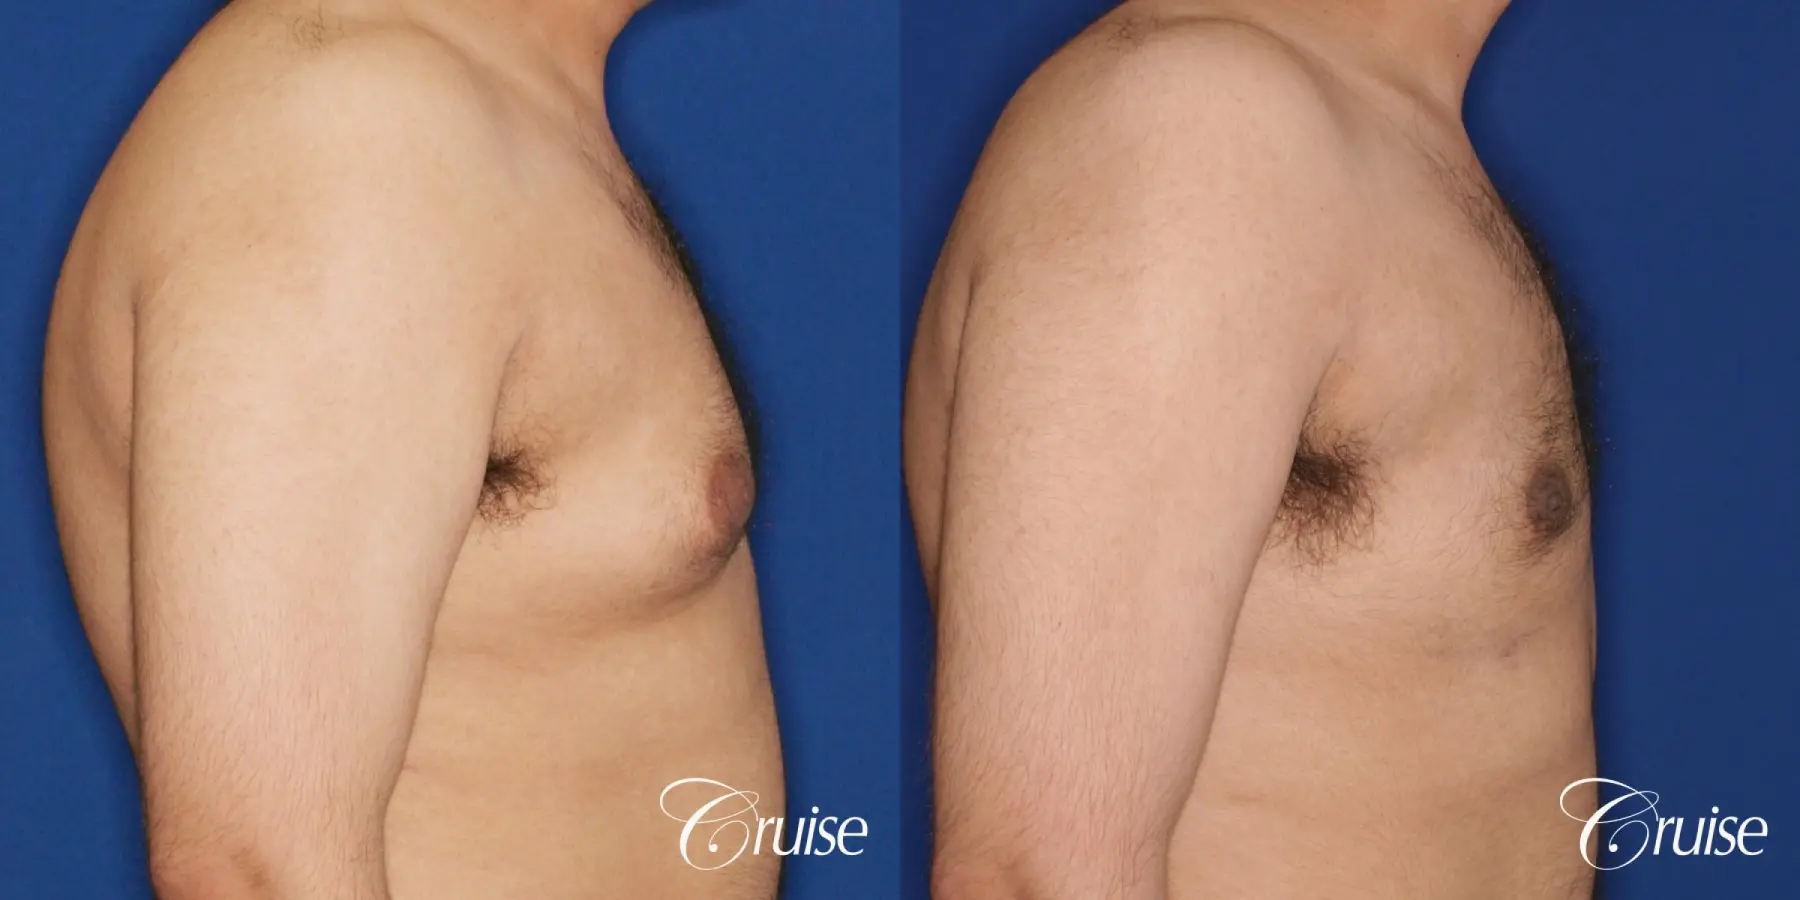 best scar on 32 gynecomastia patient - Before and After 4